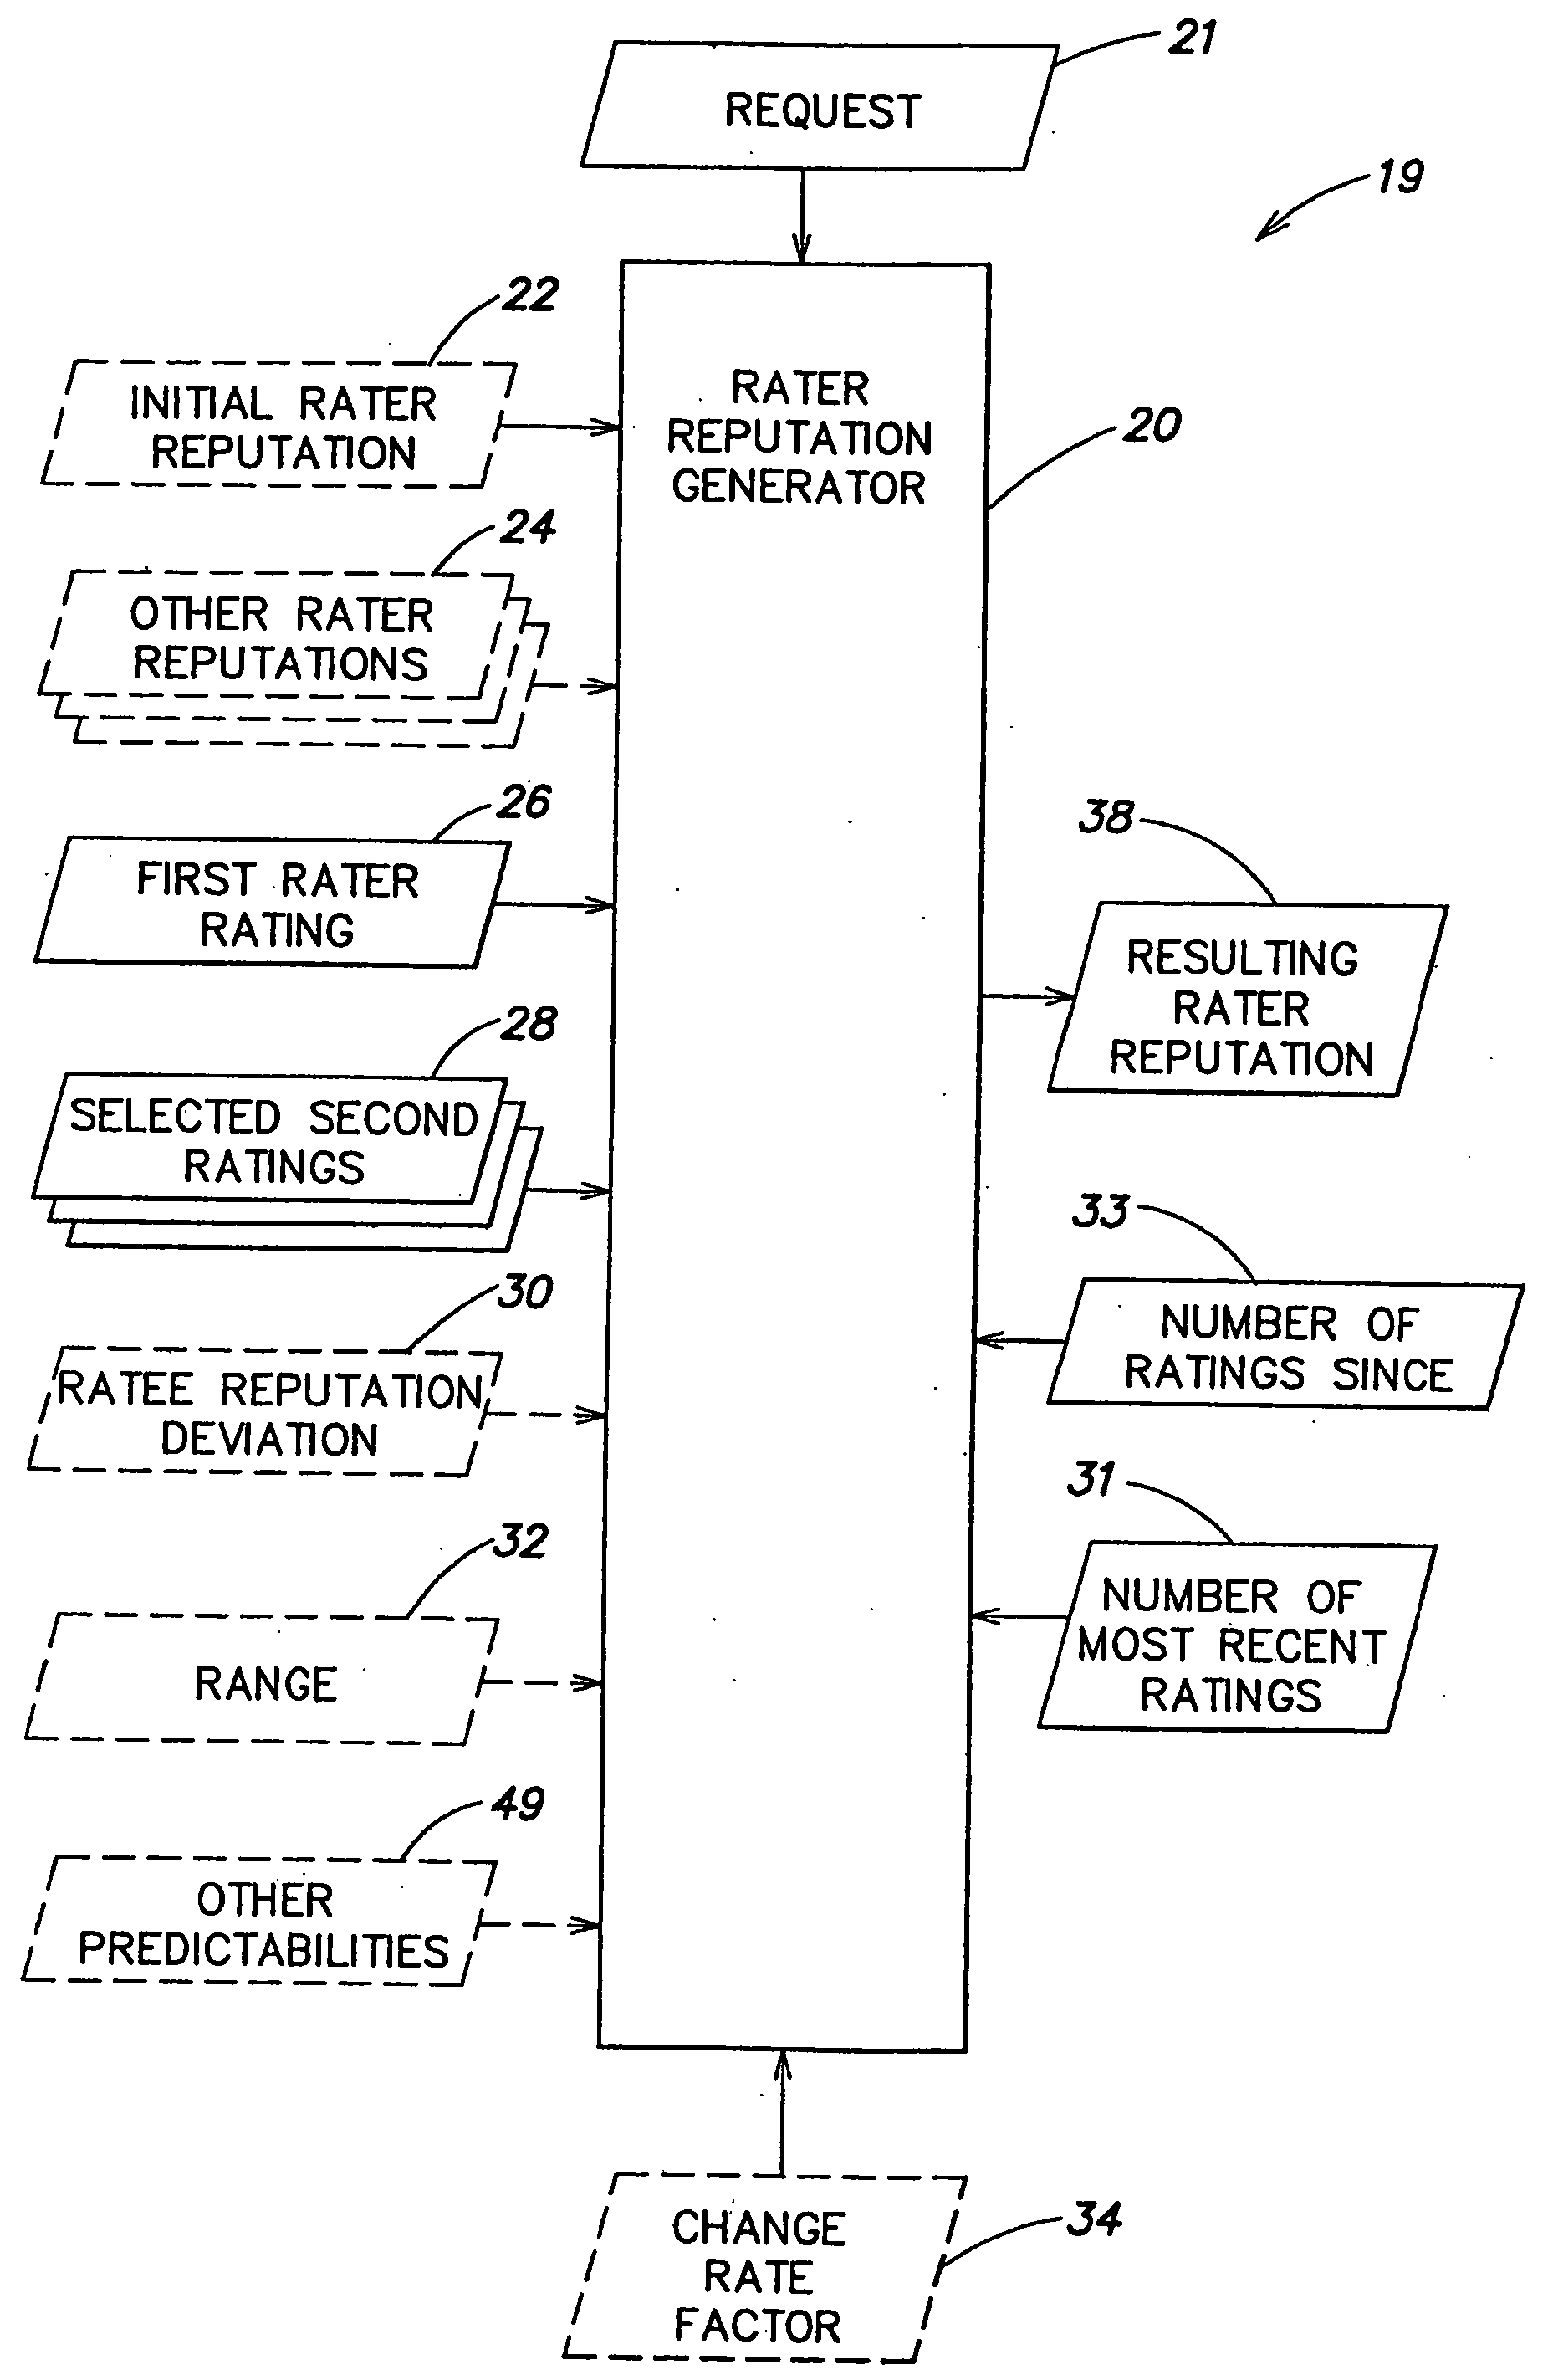 Method and system for ascribing a reputation to an entity as a rater of other entities